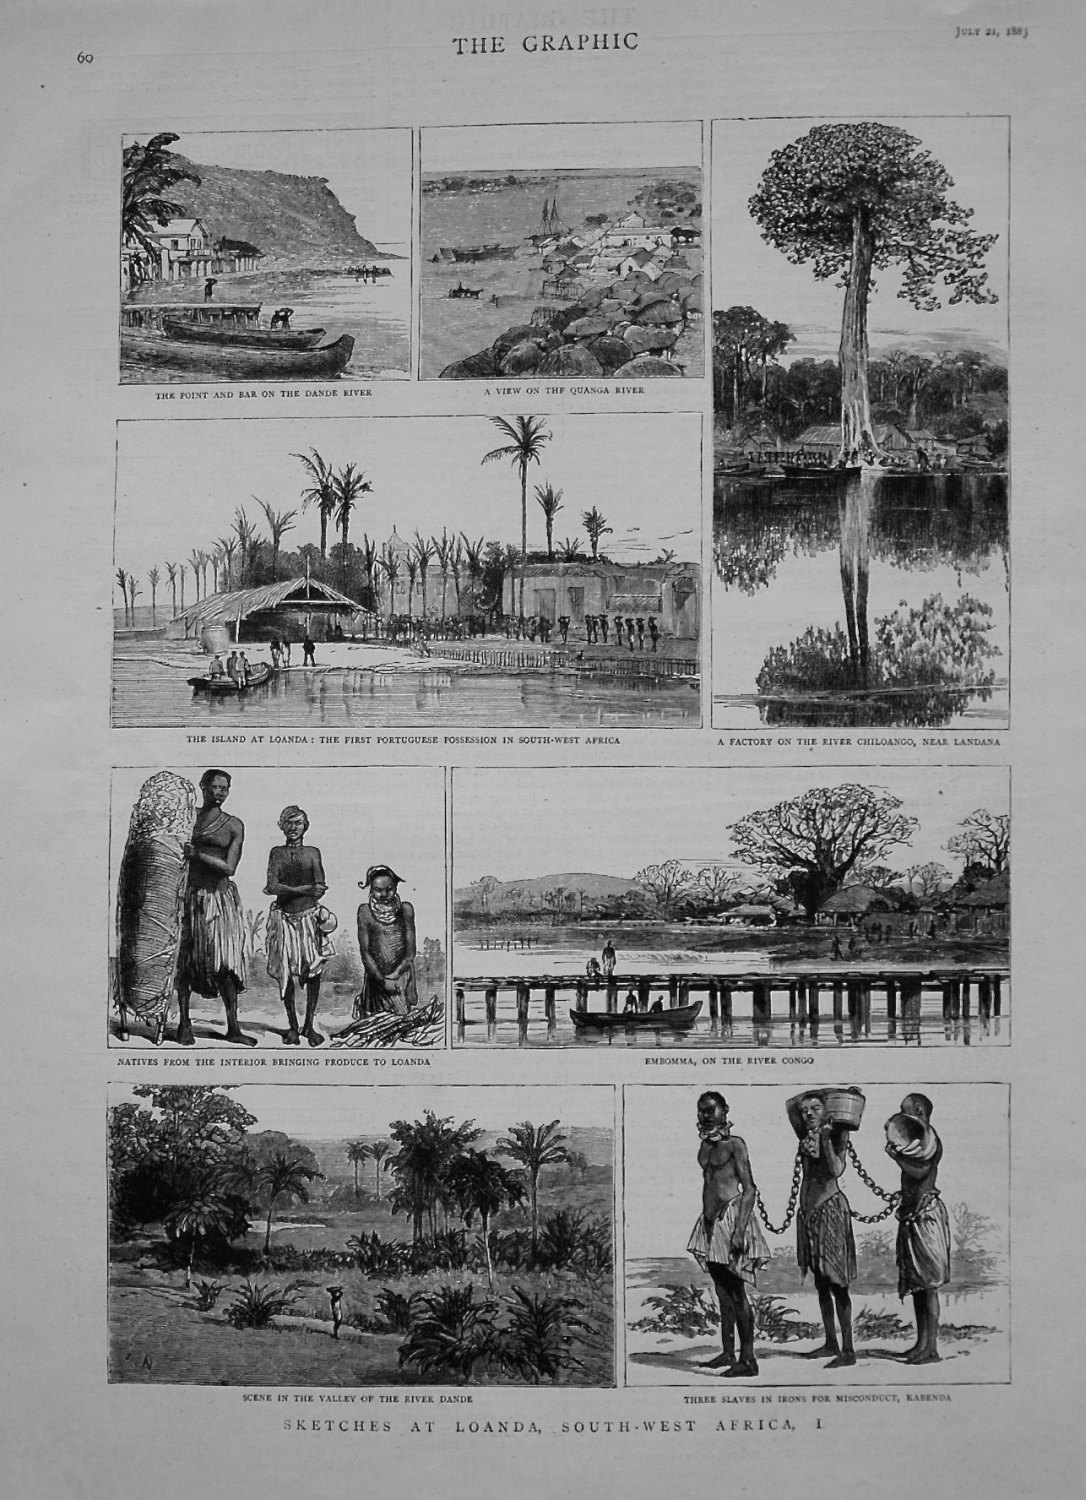 Sketches at Loanda, South-West Africa, 1.